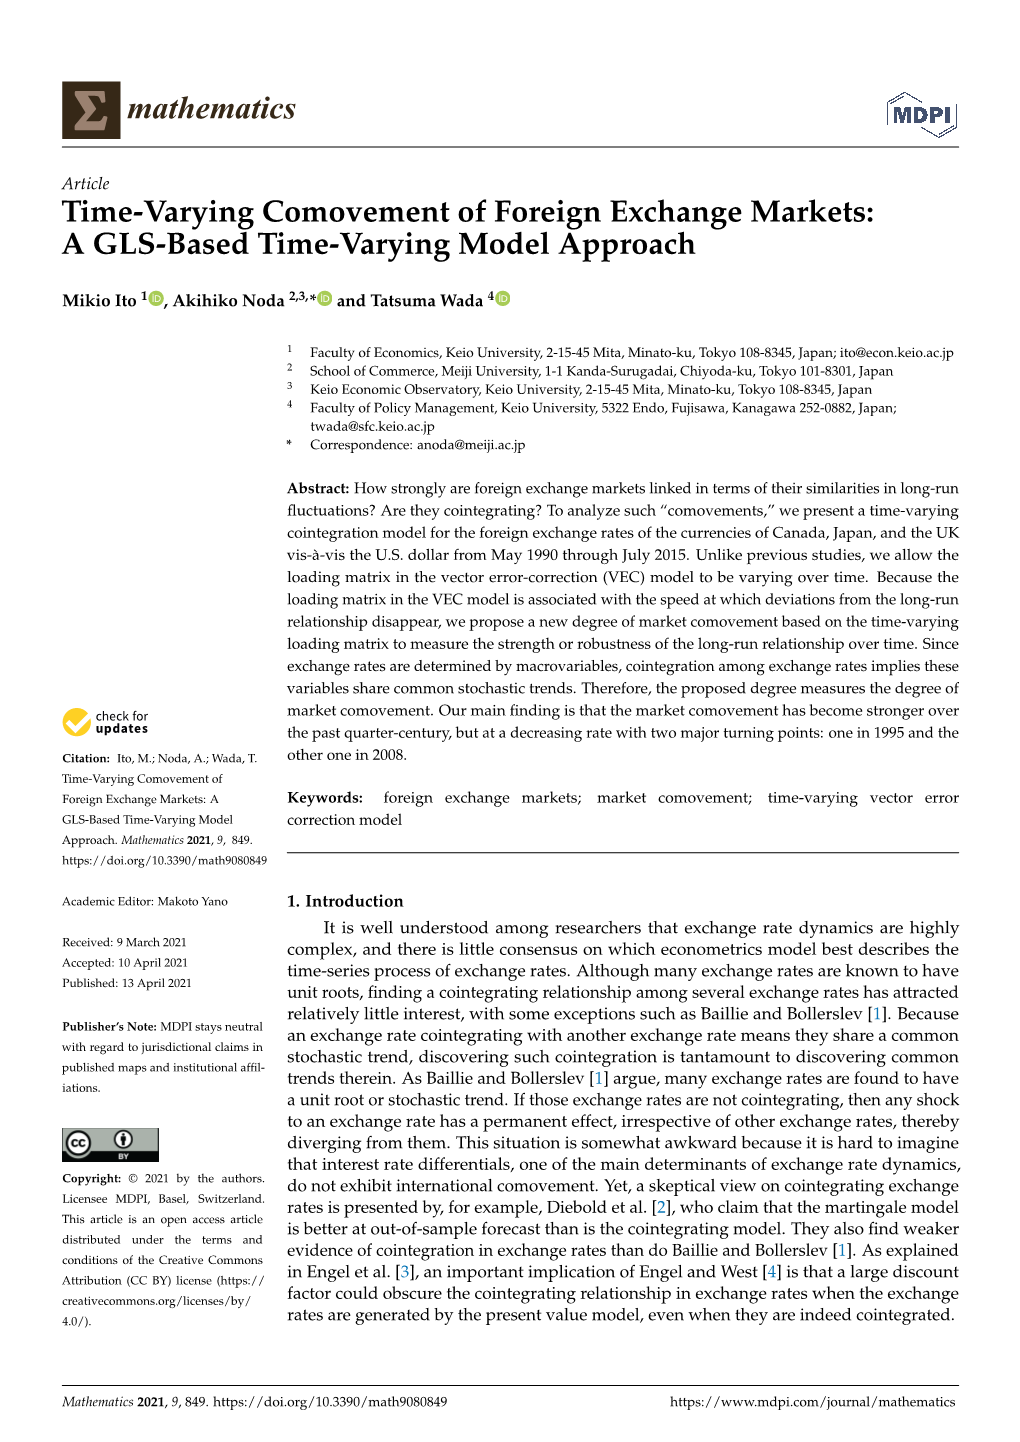 Time-Varying Comovement of Foreign Exchange Markets: a GLS-Based Time-Varying Model Approach